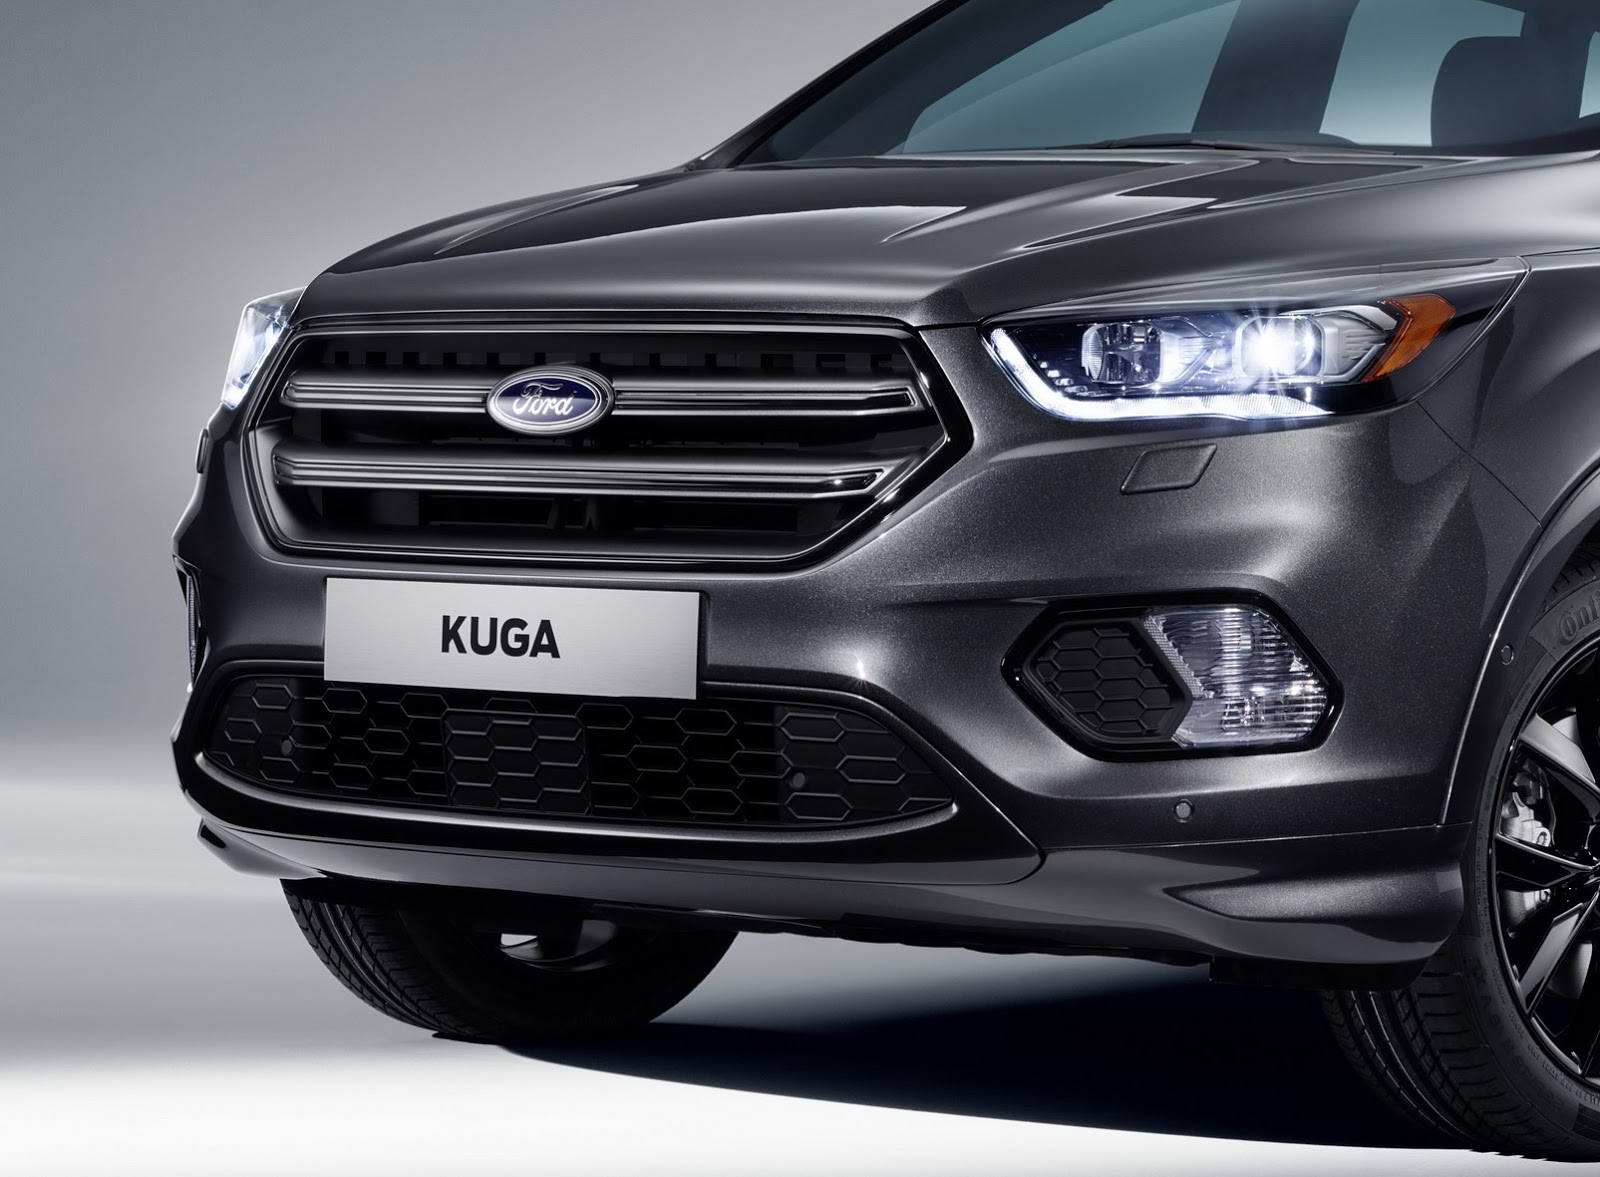 Images of 2017 Ford Kuga